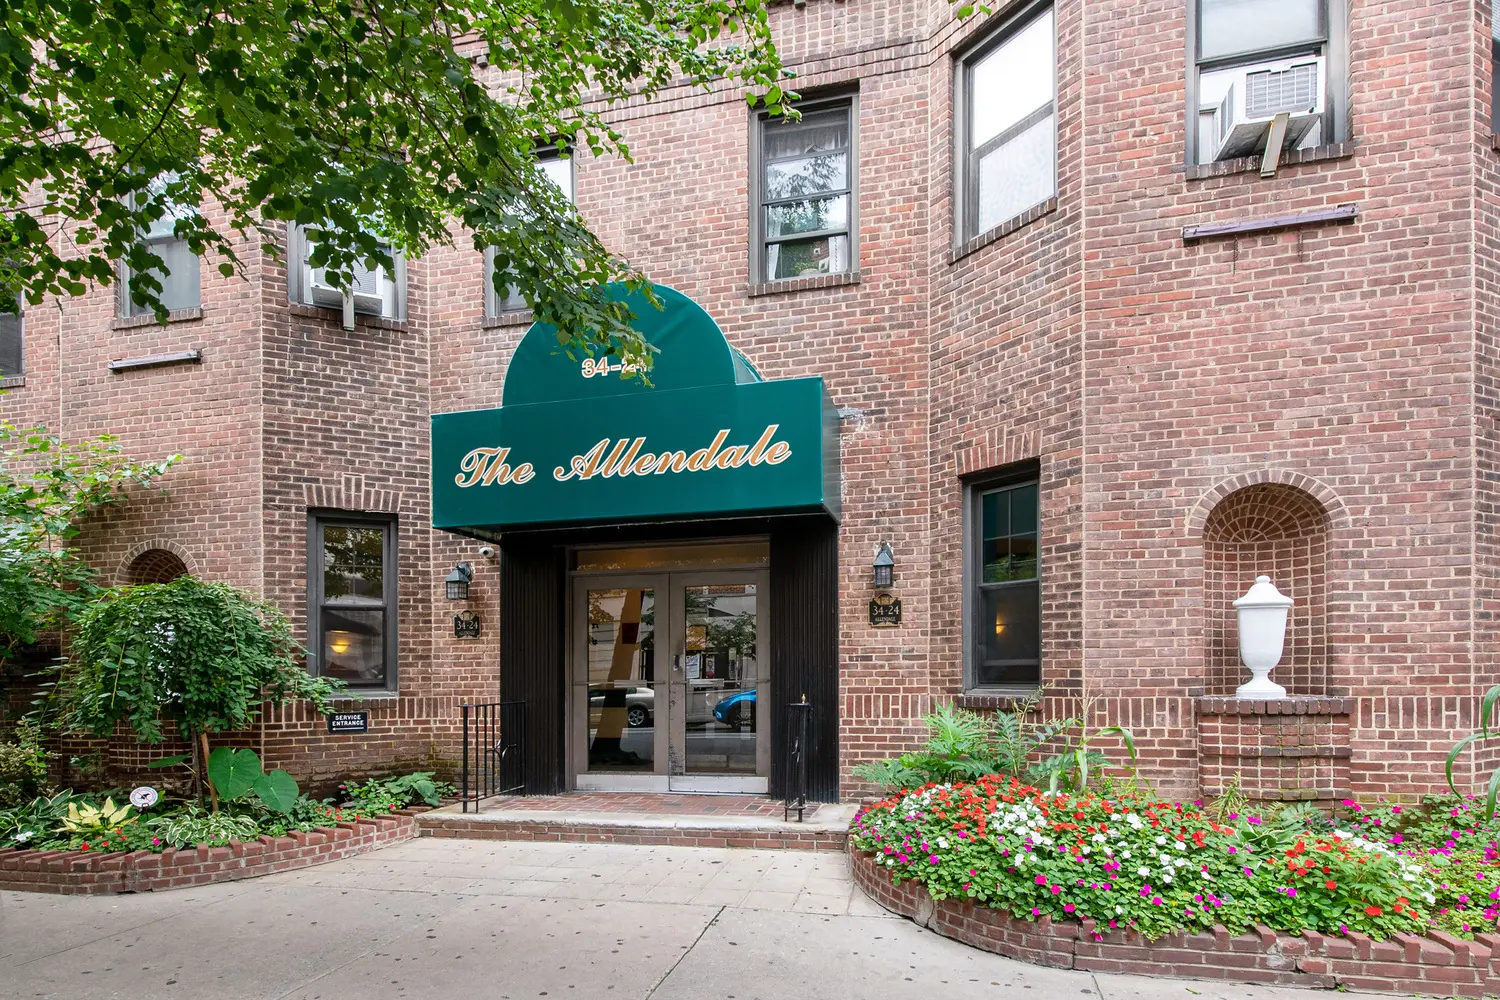 The Allendale, 34-24 82nd Street